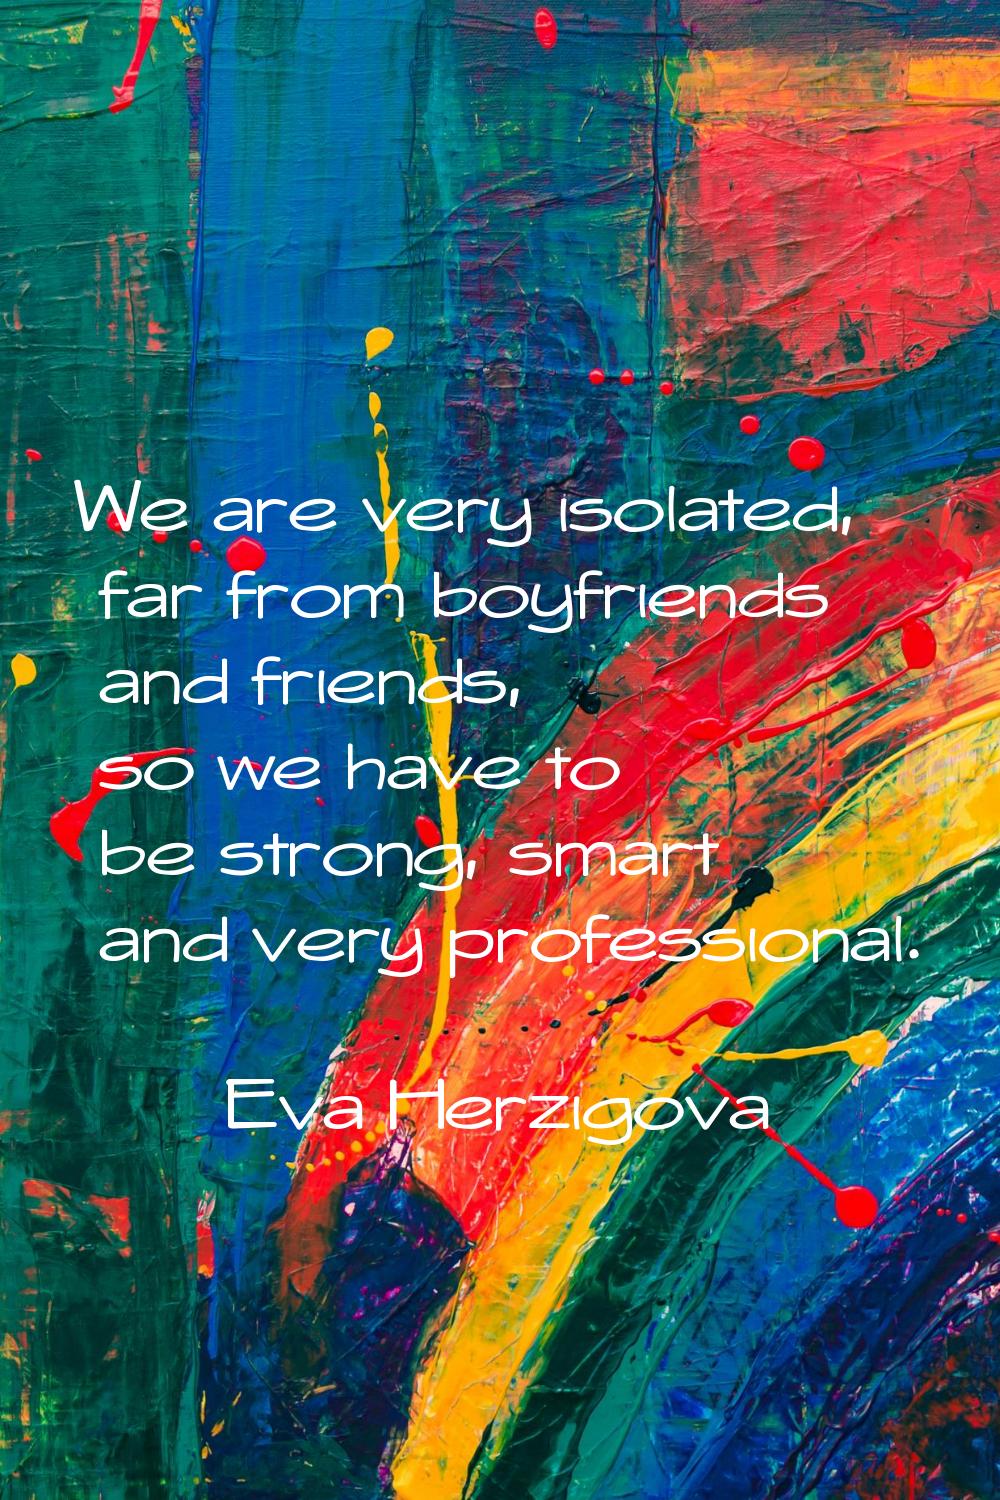 We are very isolated, far from boyfriends and friends, so we have to be strong, smart and very prof